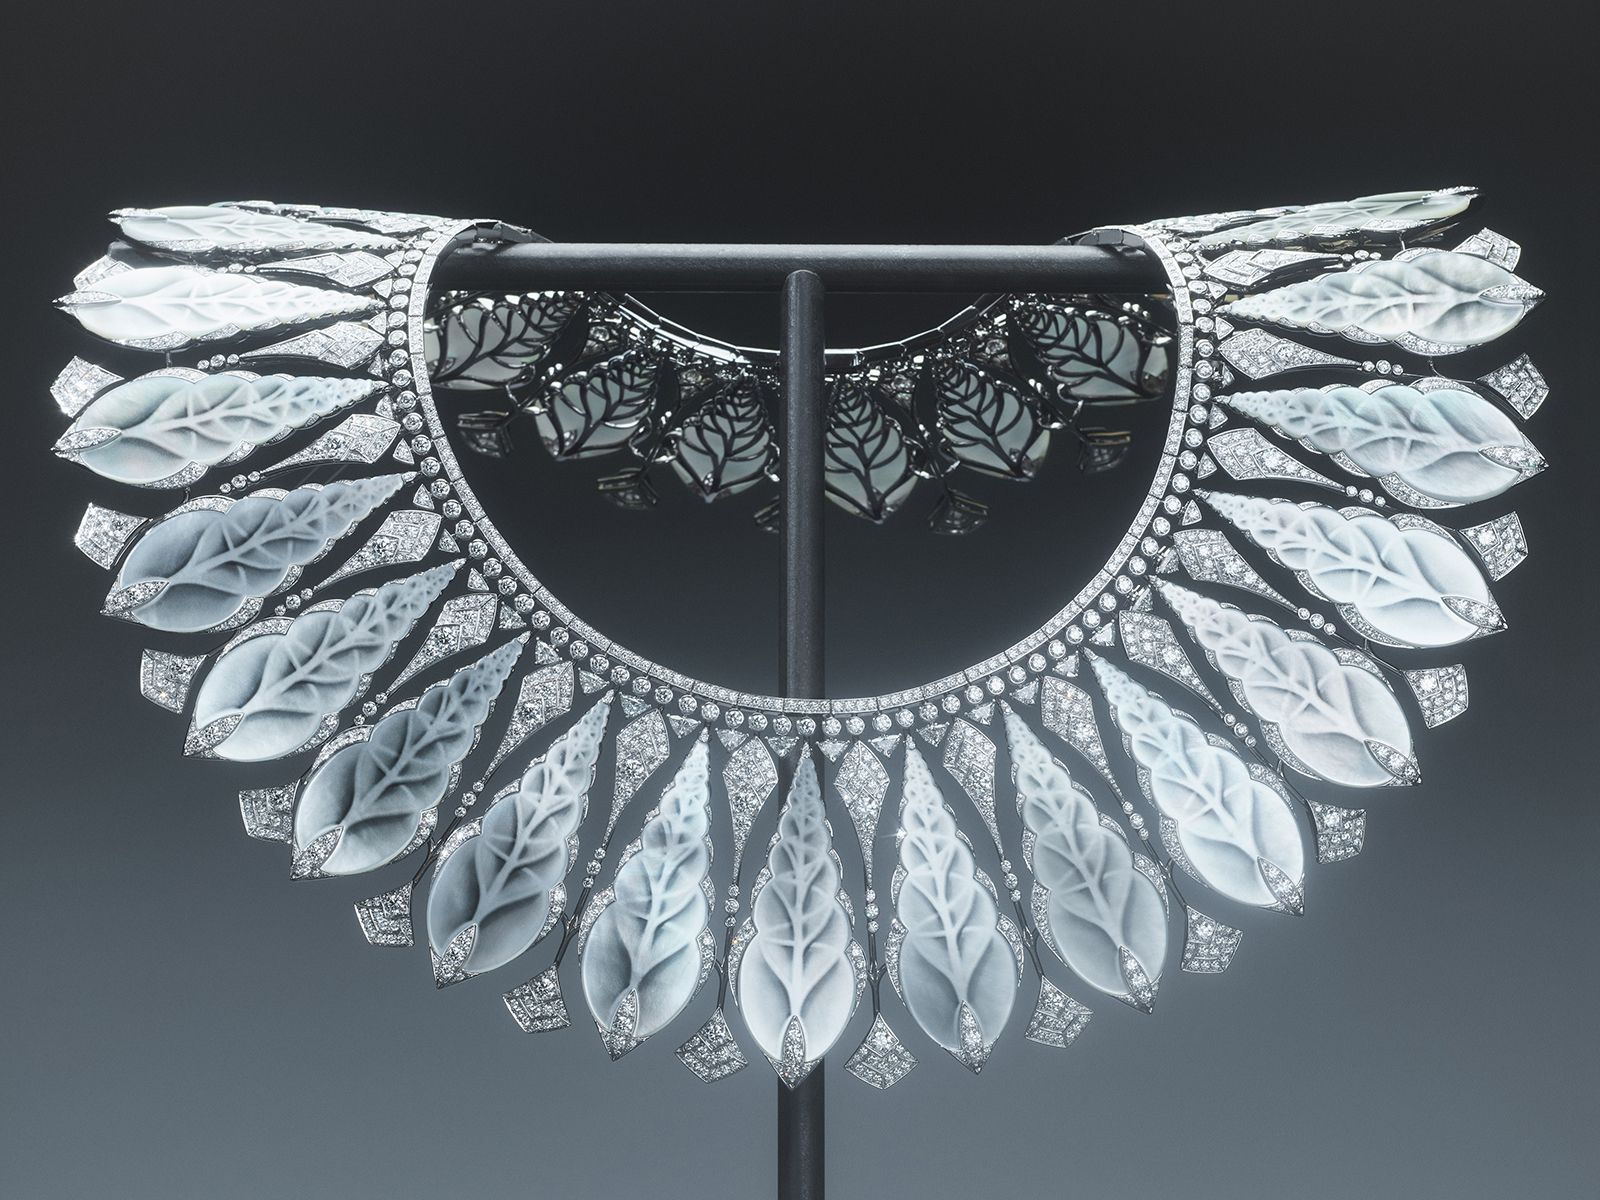 Boucheron mother-of-pearl, diamond and white gold Coquillage necklace from the Carte Blanche Ailleurs High Jewellery collection